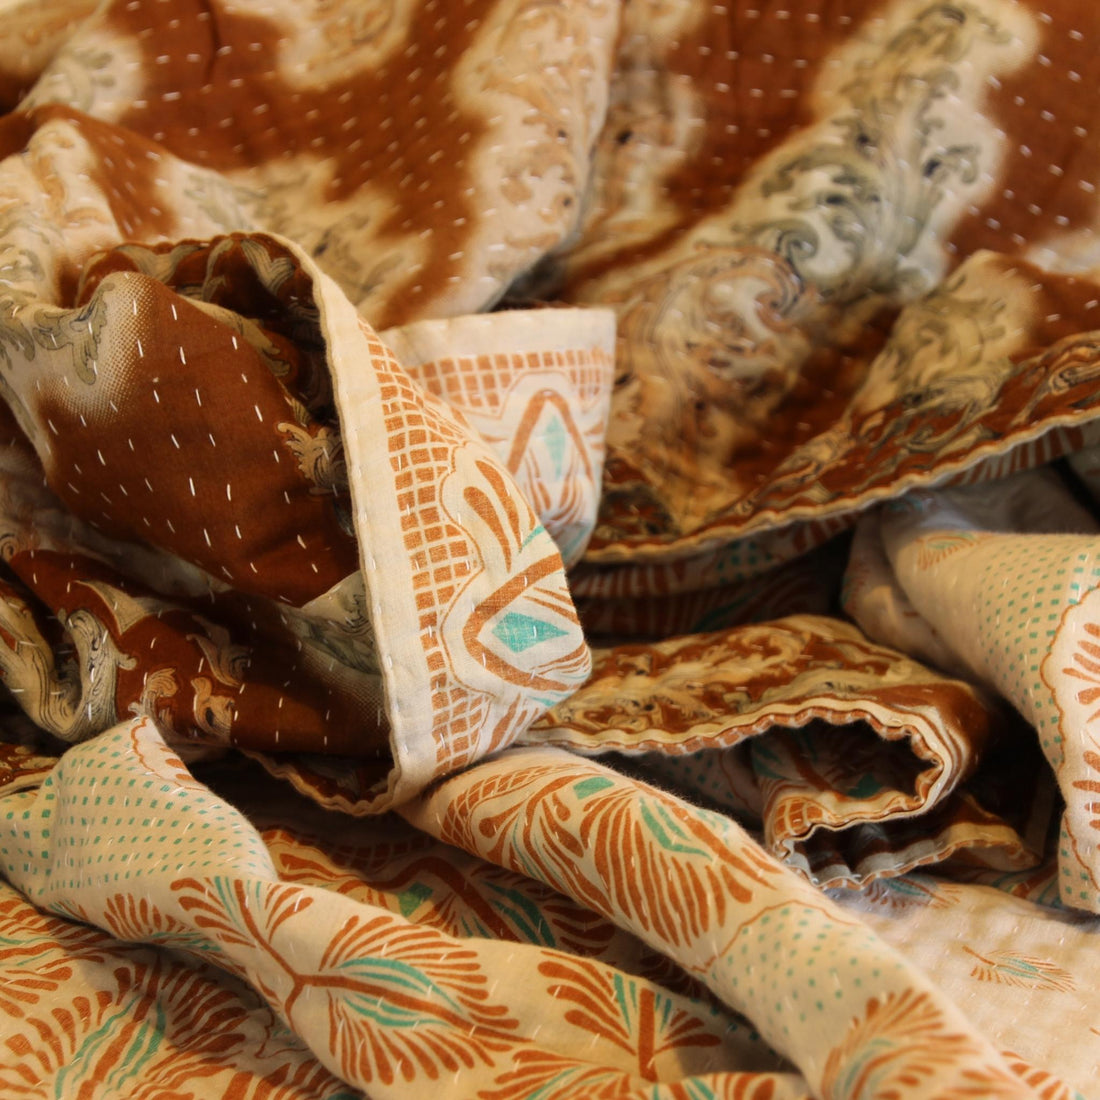 Blankets fair trade ethical sustainable fashion Cotton Blanket - Double - Terracotta Swirling Leaves conscious purchase Basha